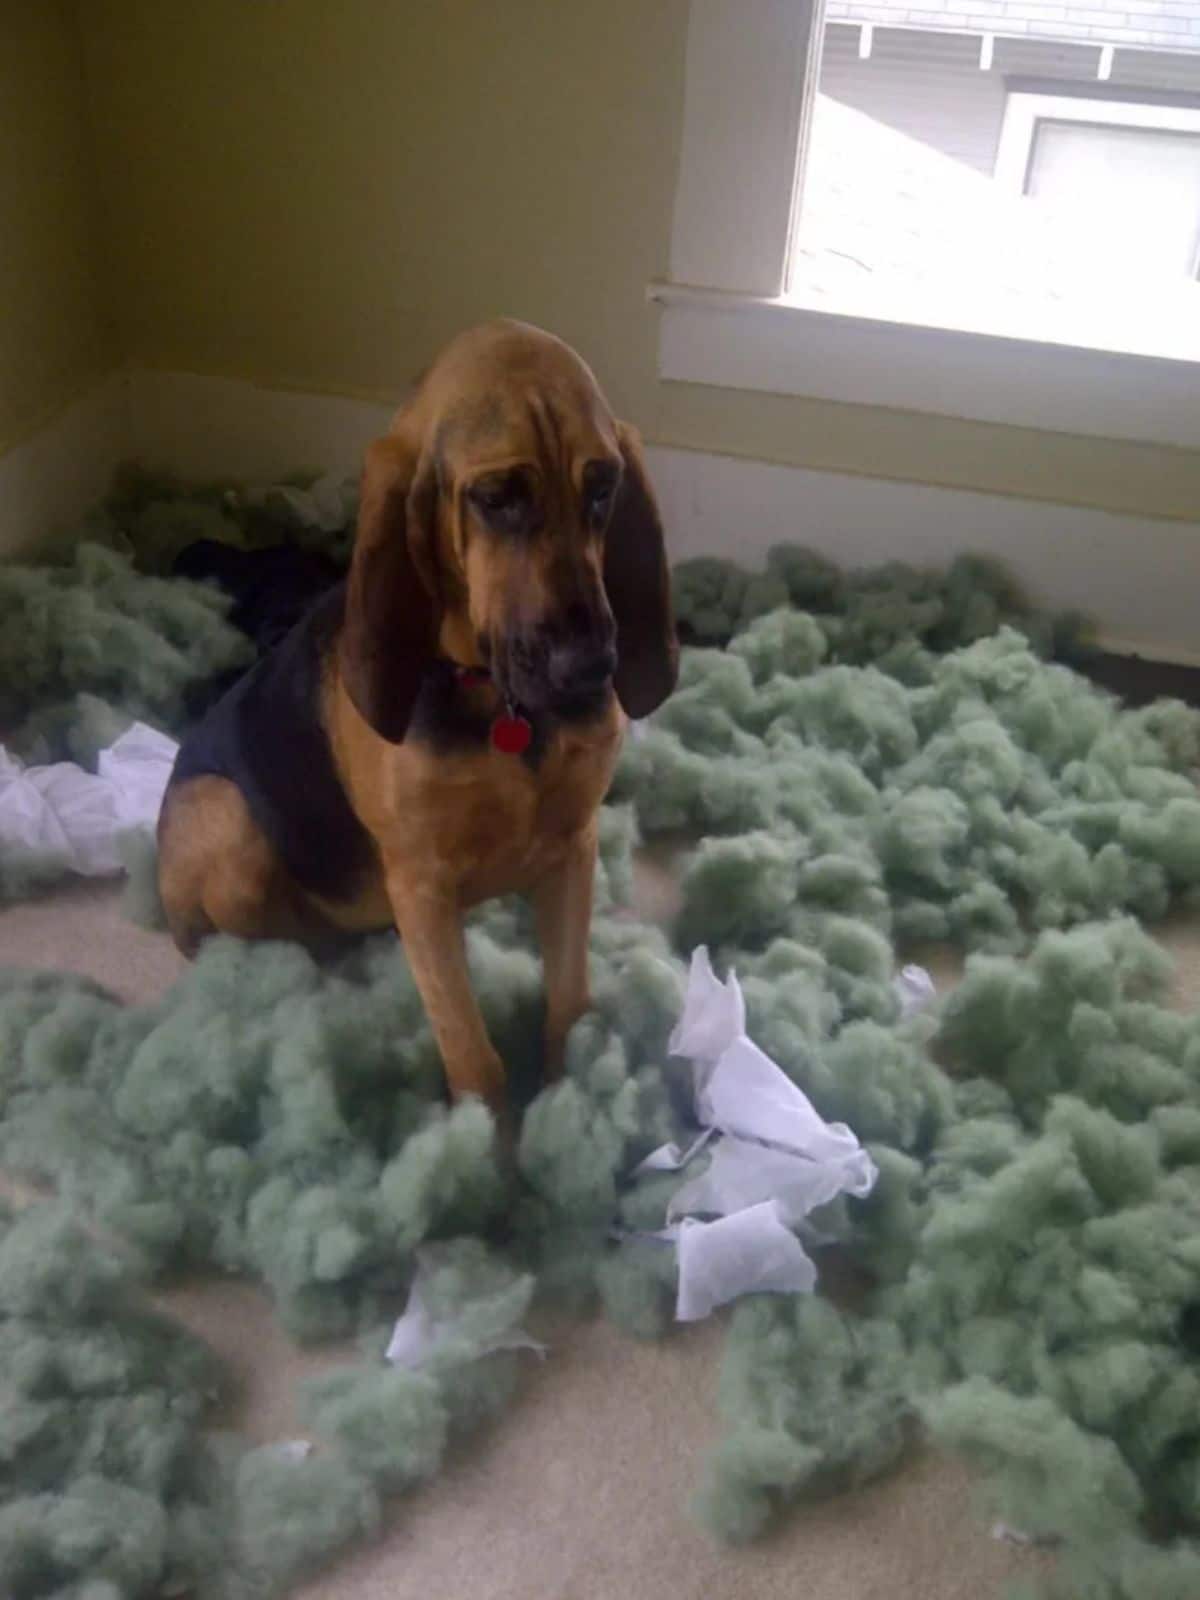 brown and black hound sitting in the middle of green stuffing from a destroyed dog bed